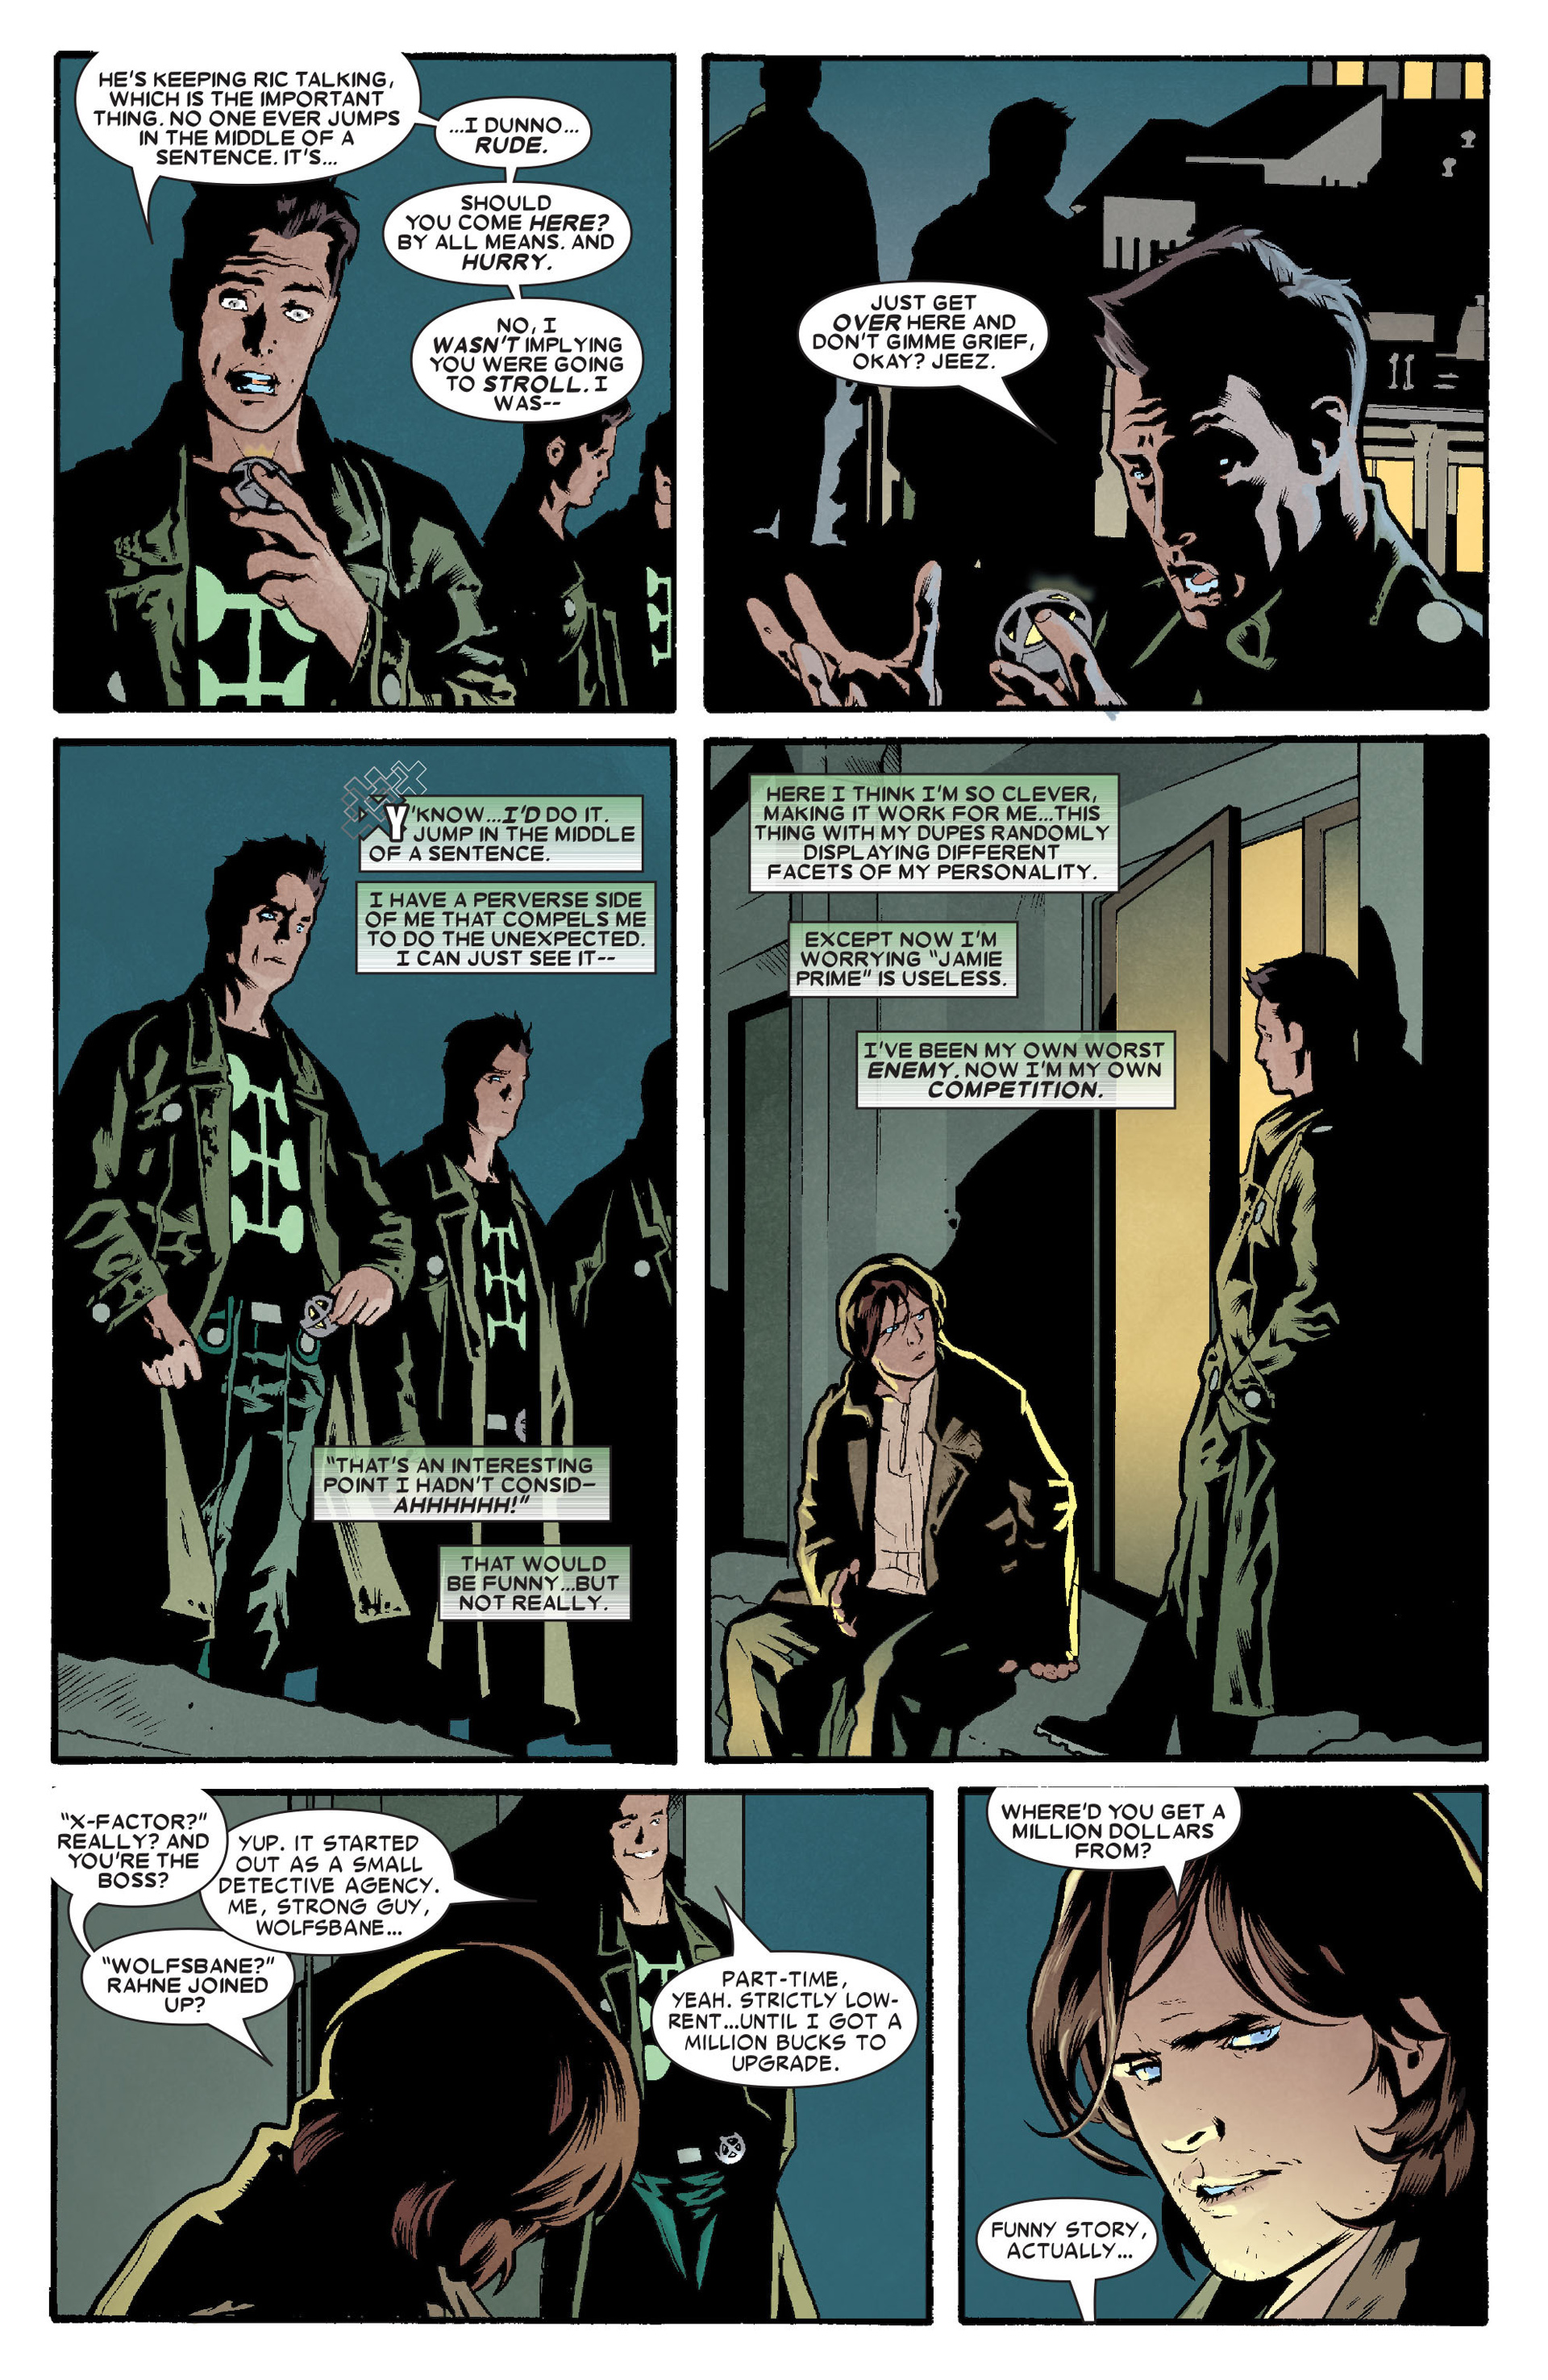 X-Factor (2006) 1 Page 13